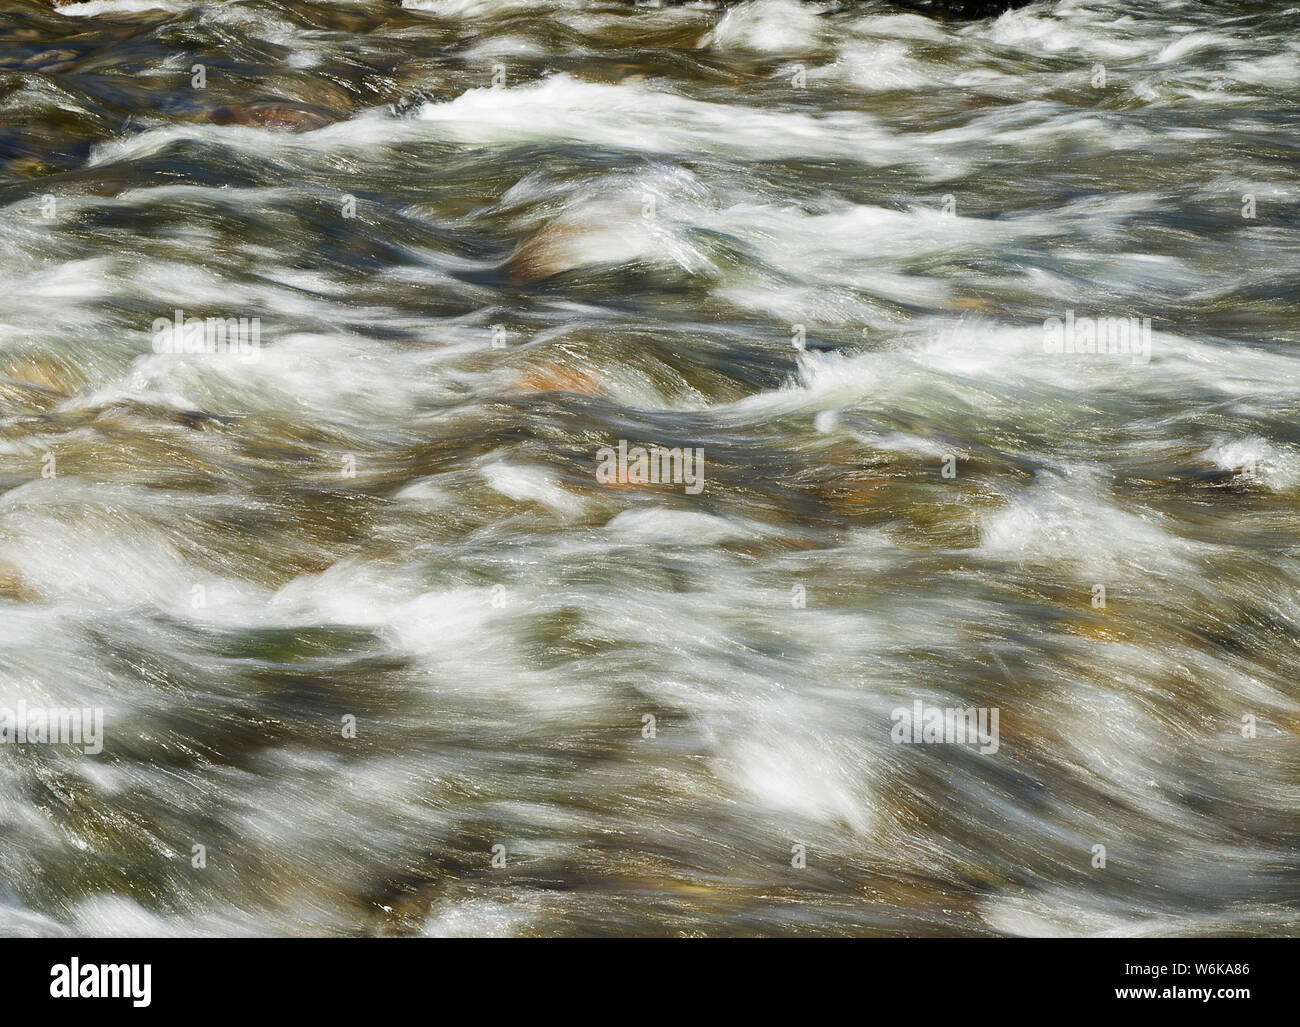 River rapids during spring snowmelt Stock Photo